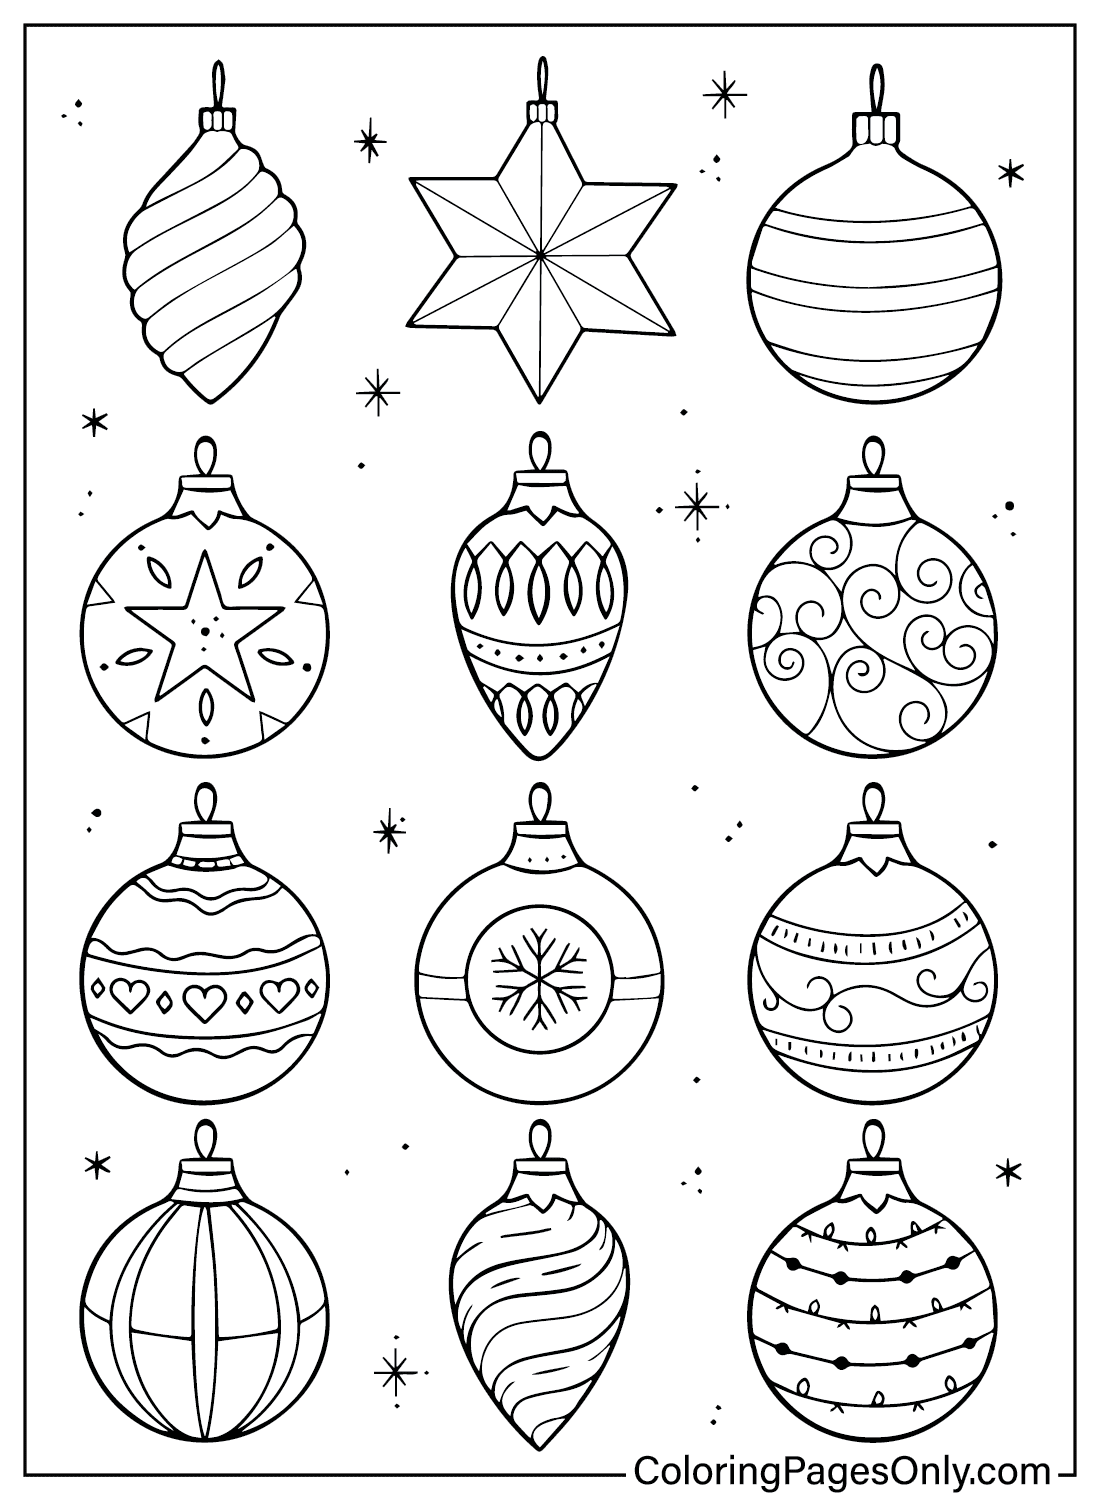 Christmas Coloring Pages Ornaments from Christmas Ornaments